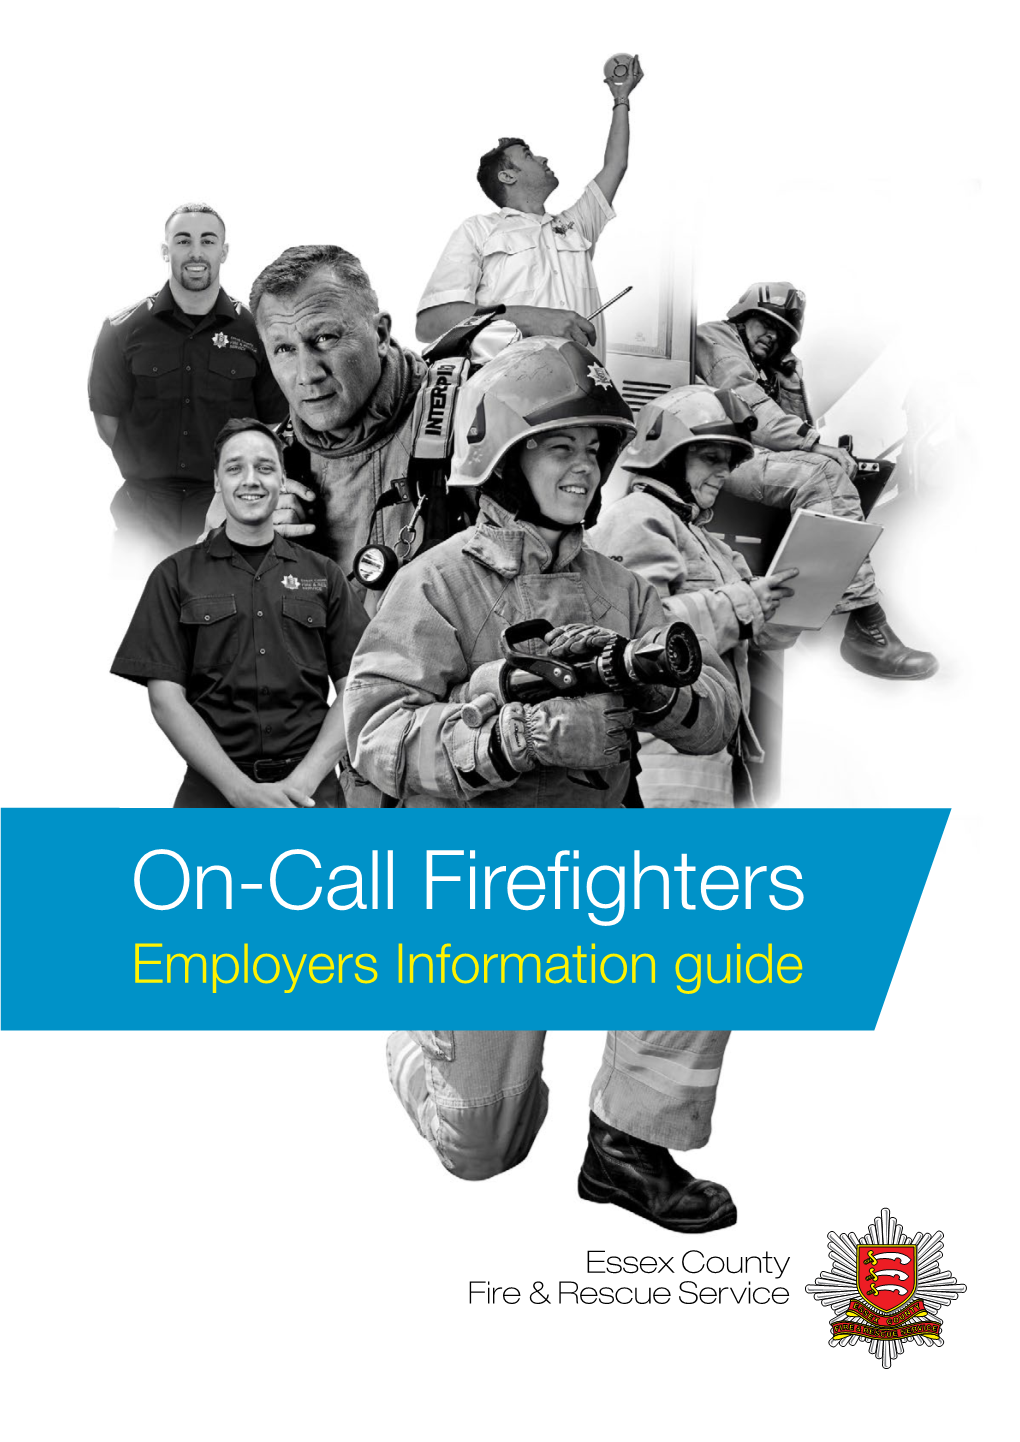 On-Call Firefighters Employers Information Guide